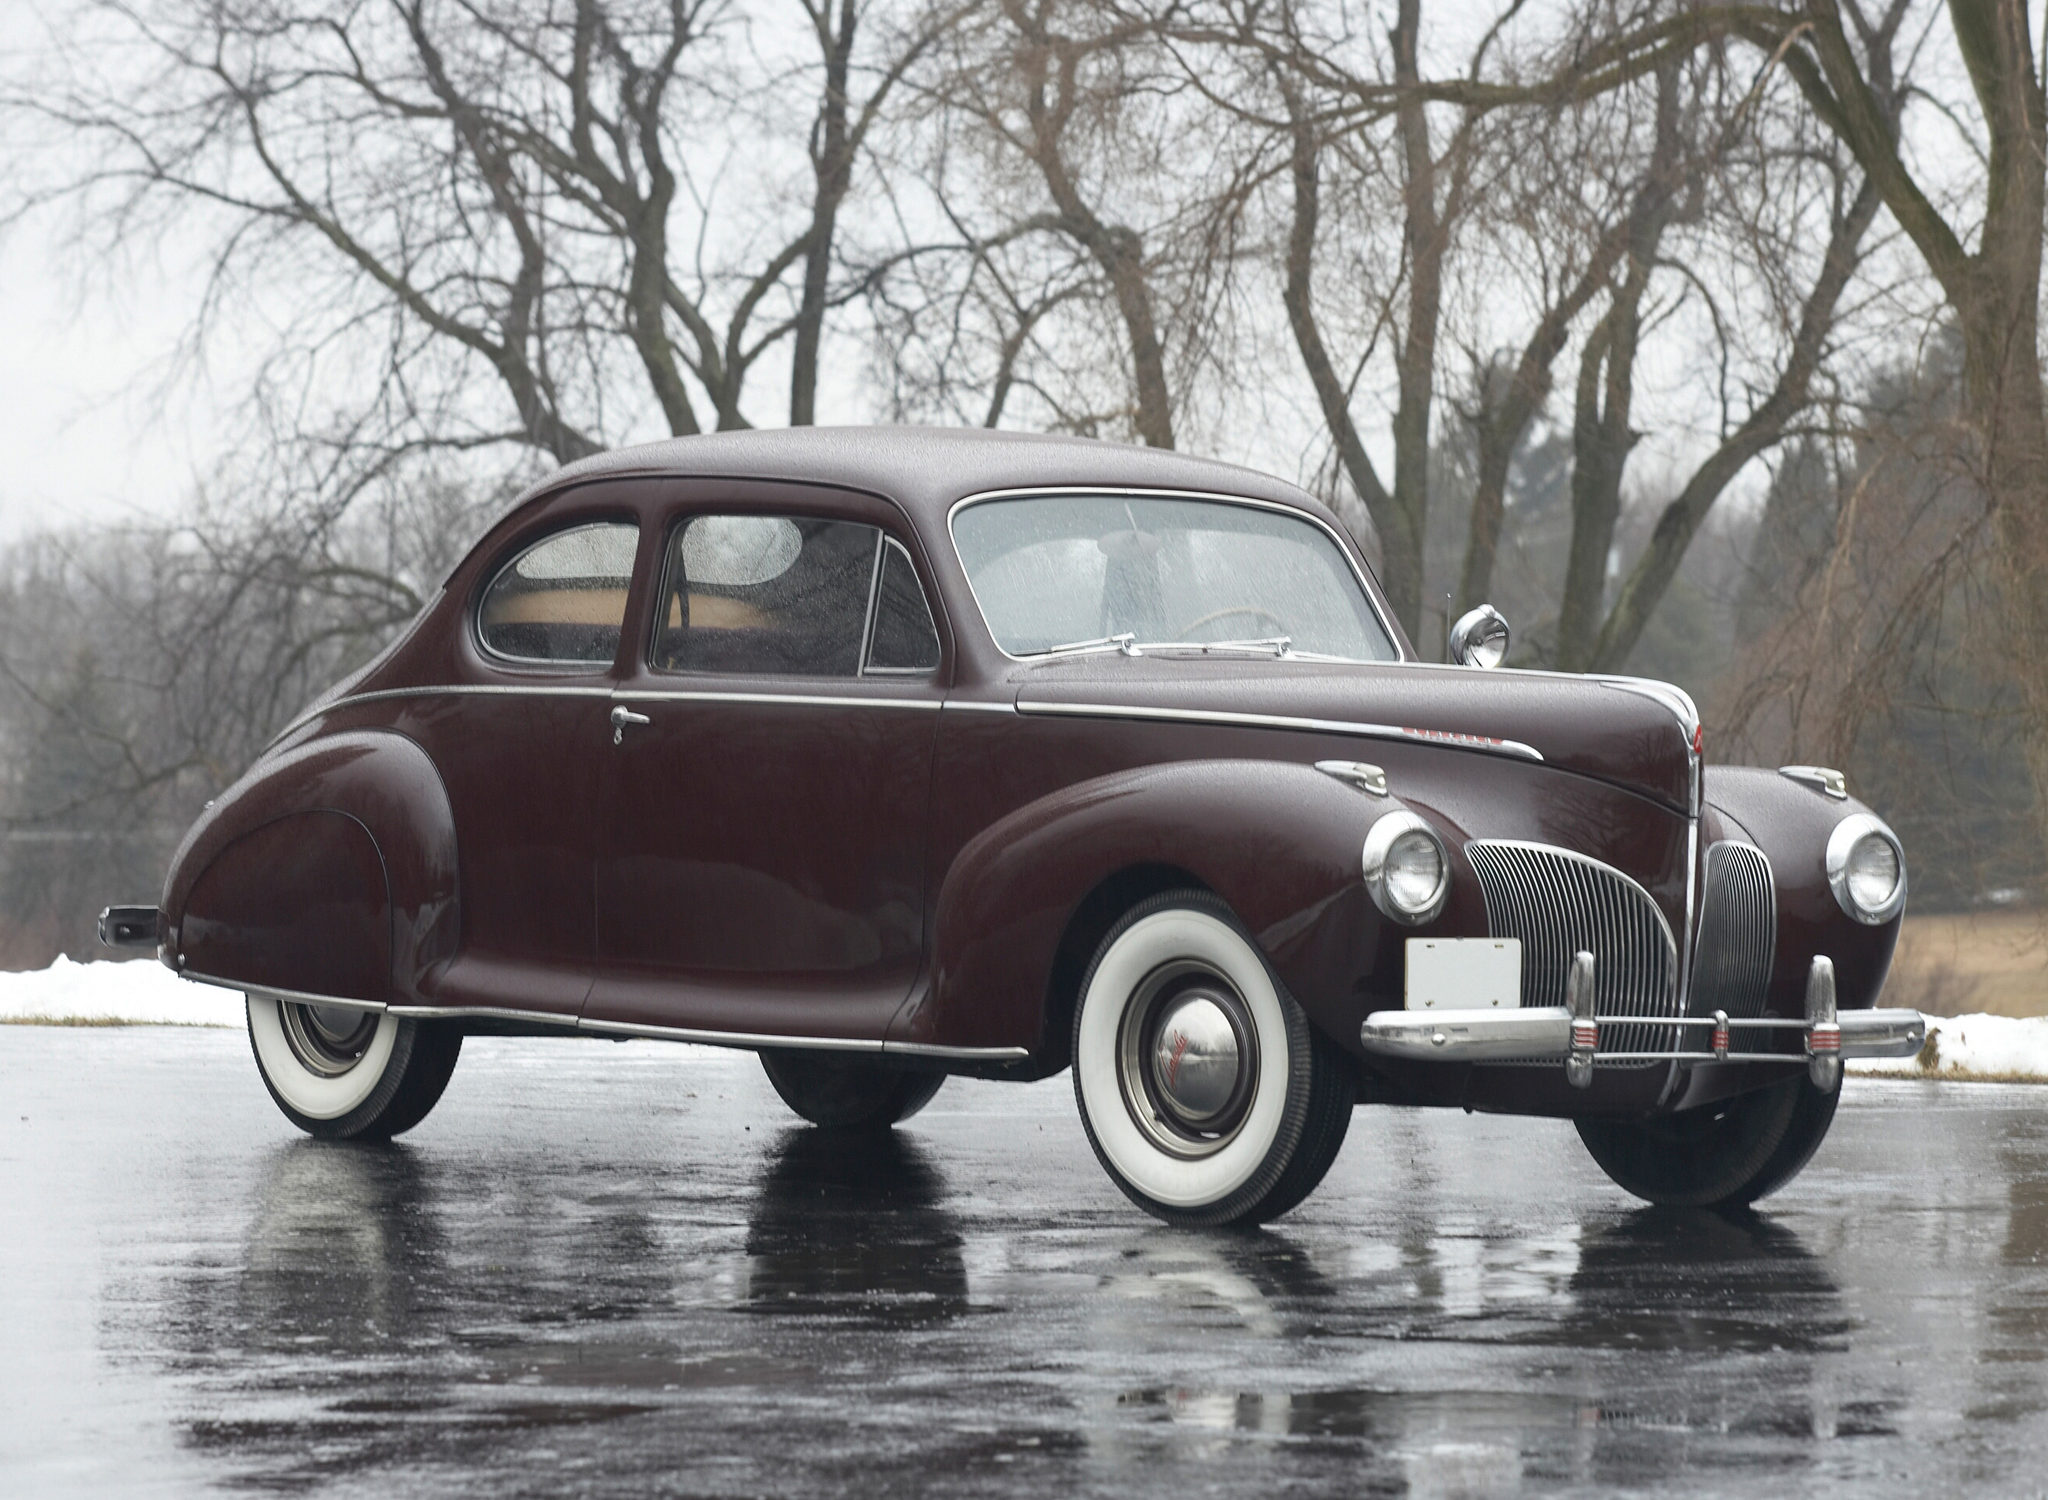 1941 Lincoln Zephyr Club Coupe, Lincoln, Lincoln Zephyr